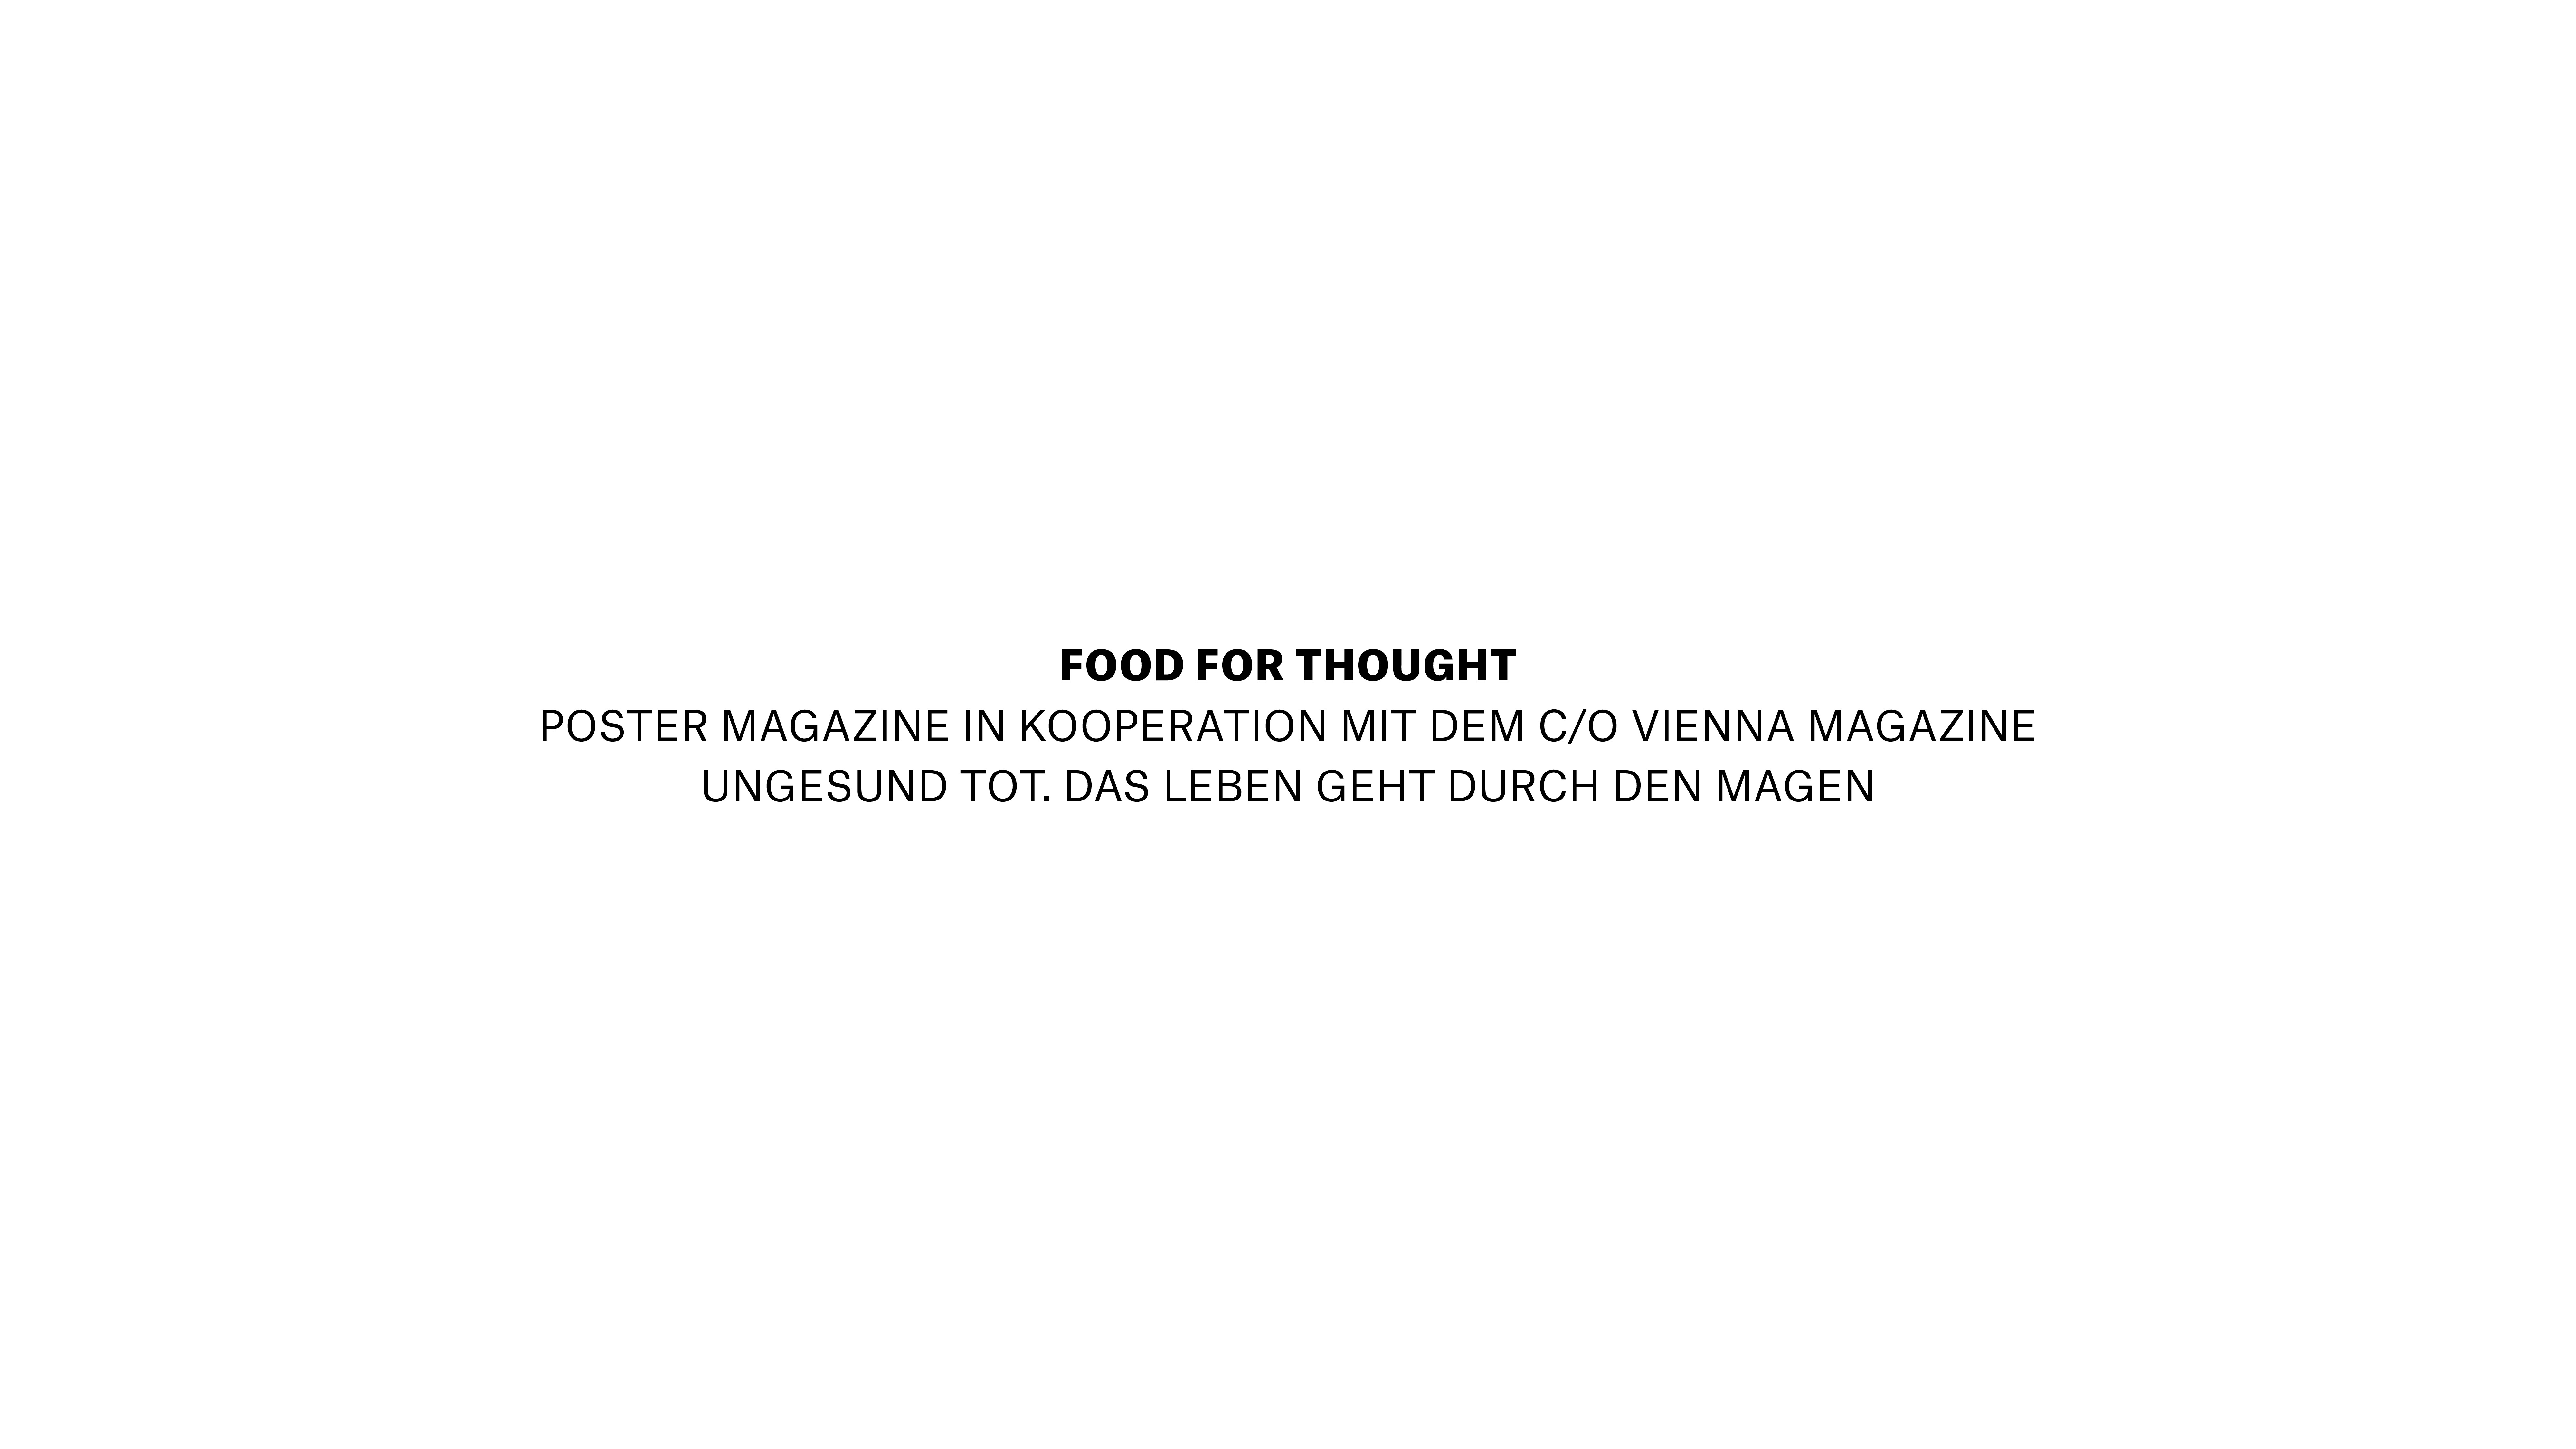 FOOD FOR THOUGHT — UNGESUND TOT